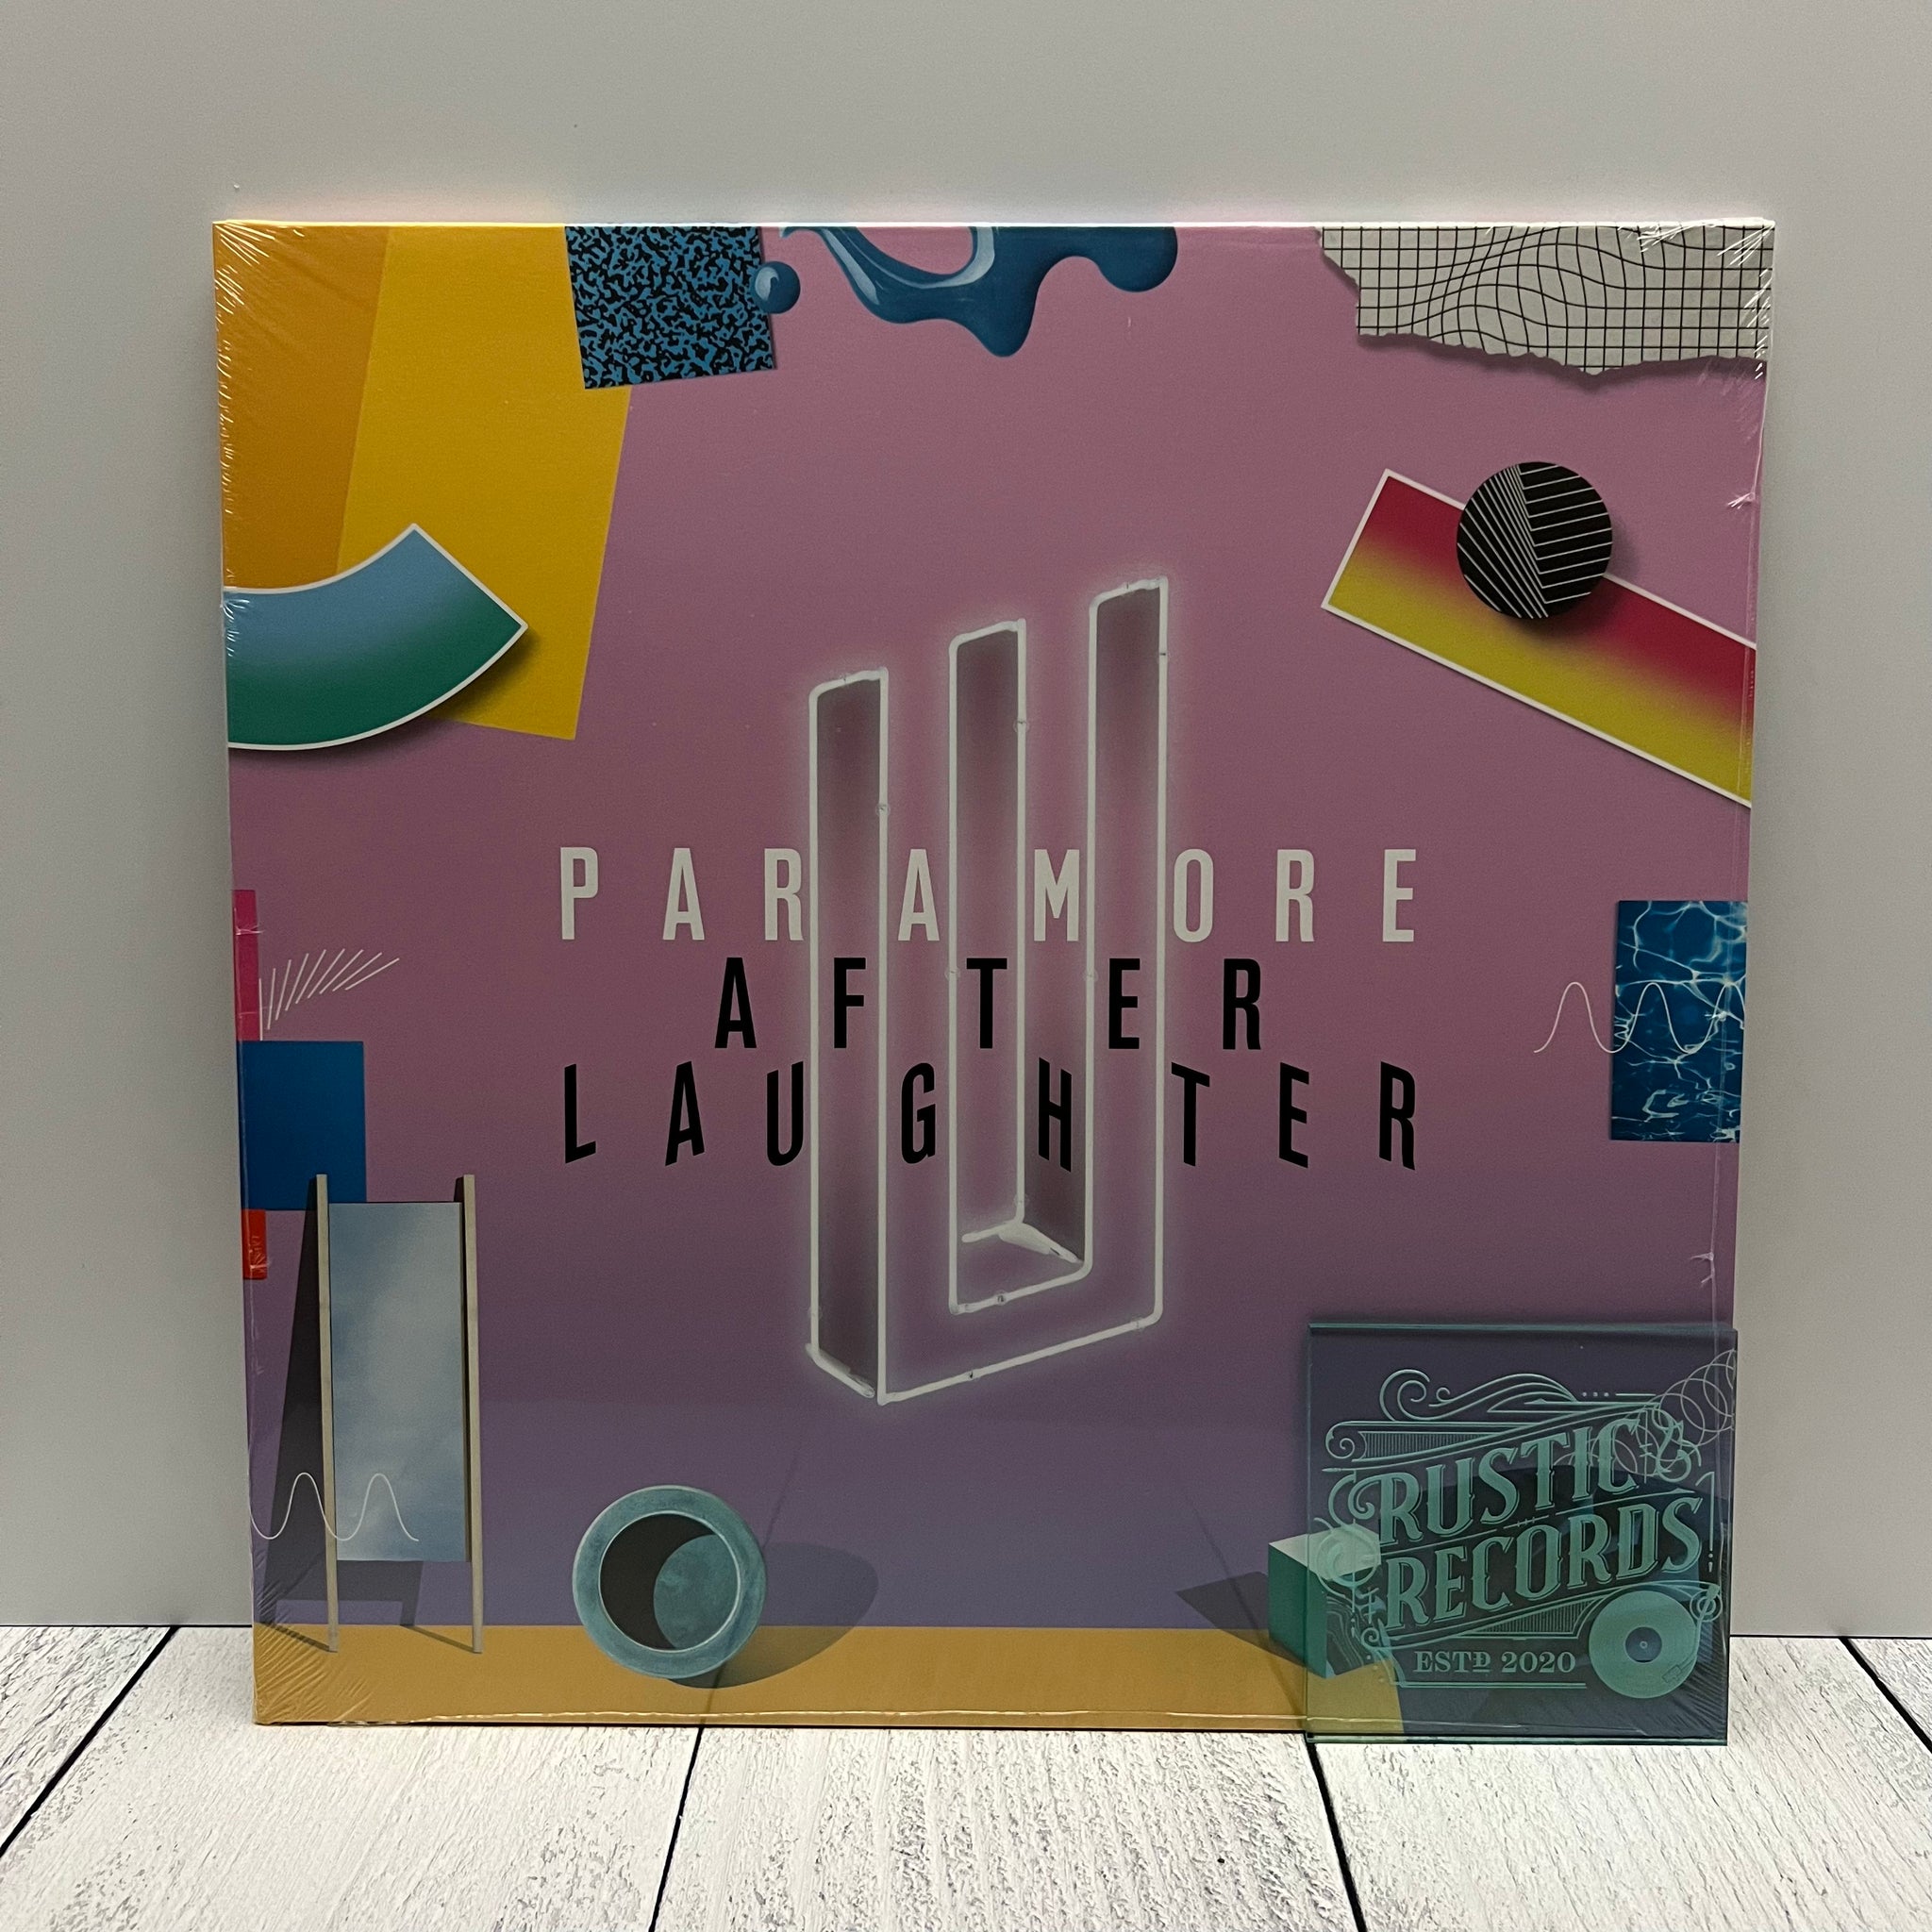 Paramore - After Laughter (Black/White Vinyl)